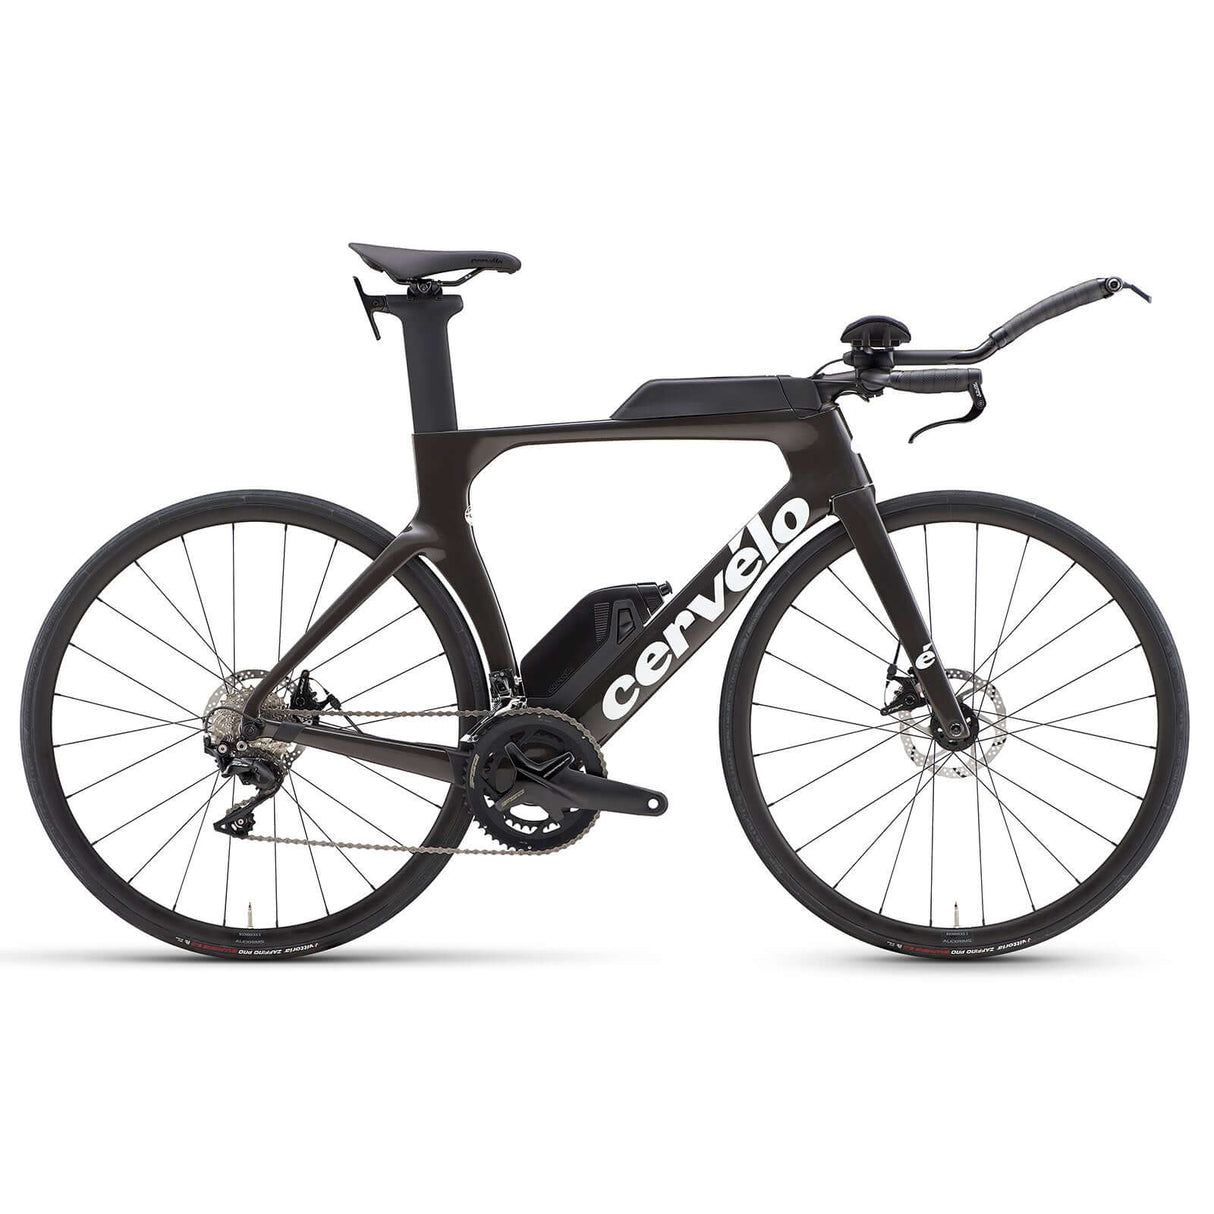 P-Series Ultegra - Strictly Bicycles